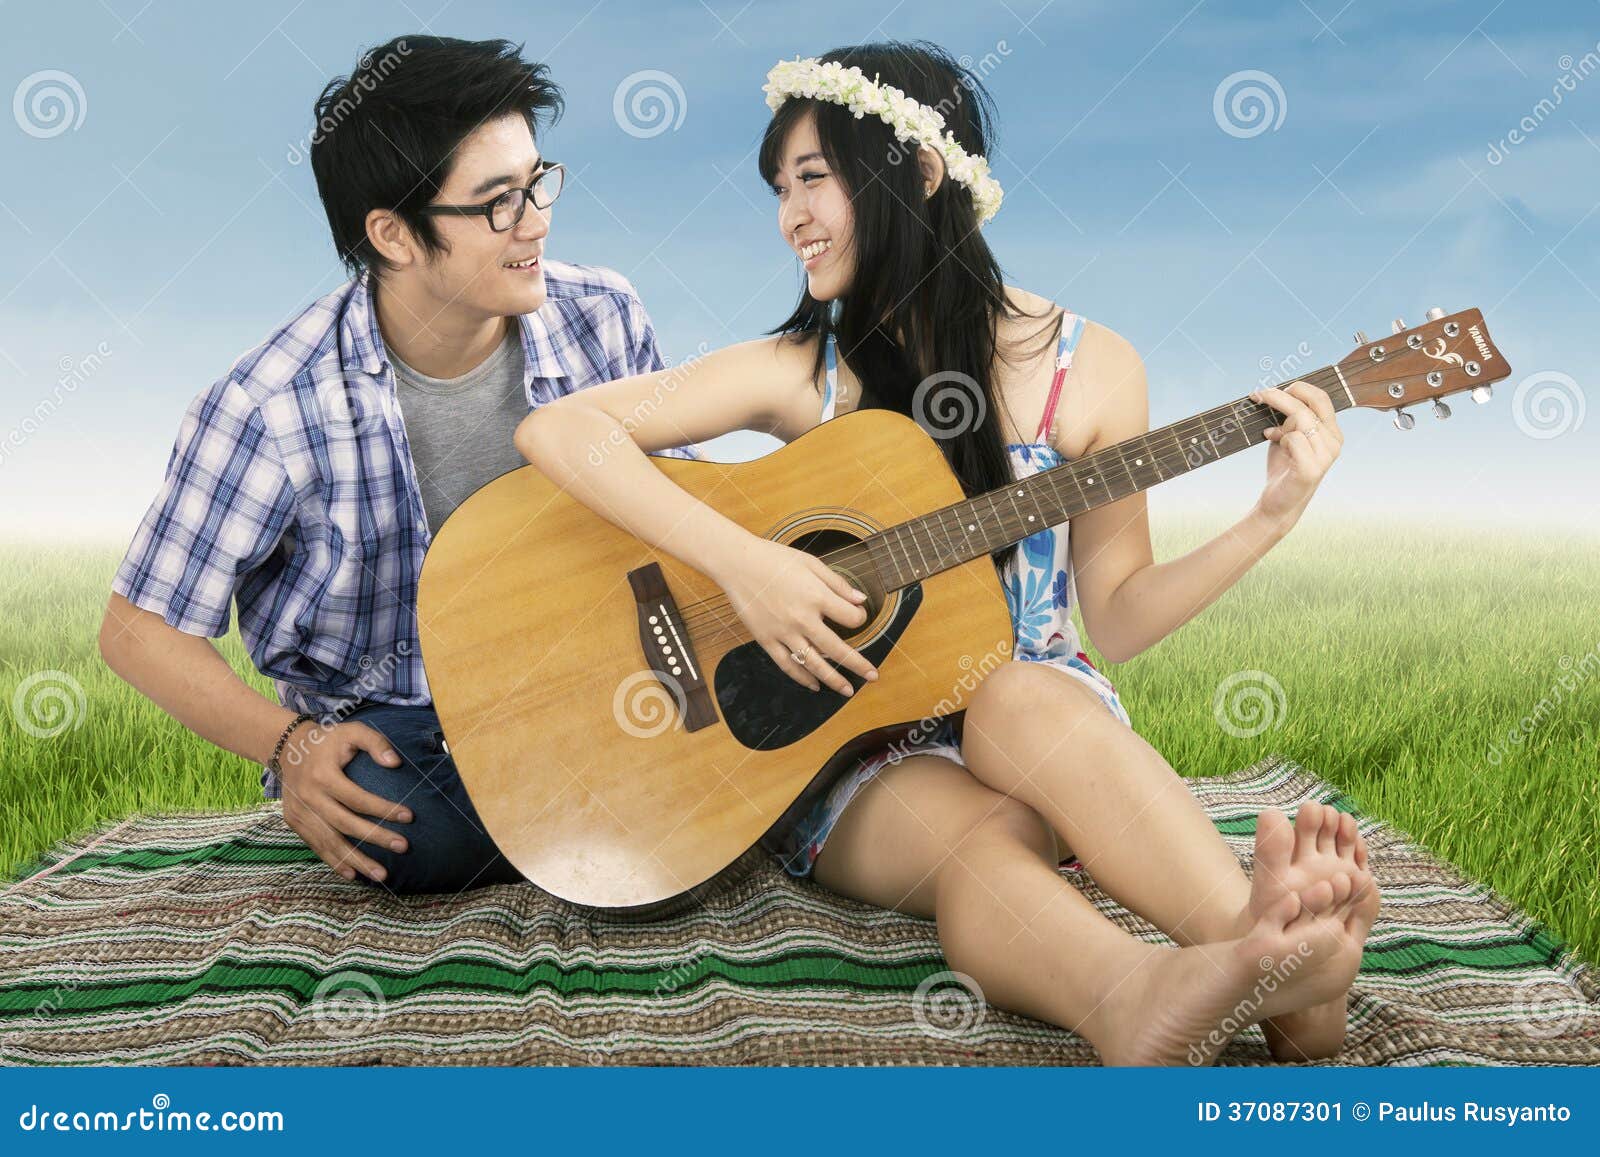 Romantic Couple Guitar Stock Photos and Images - 123RF